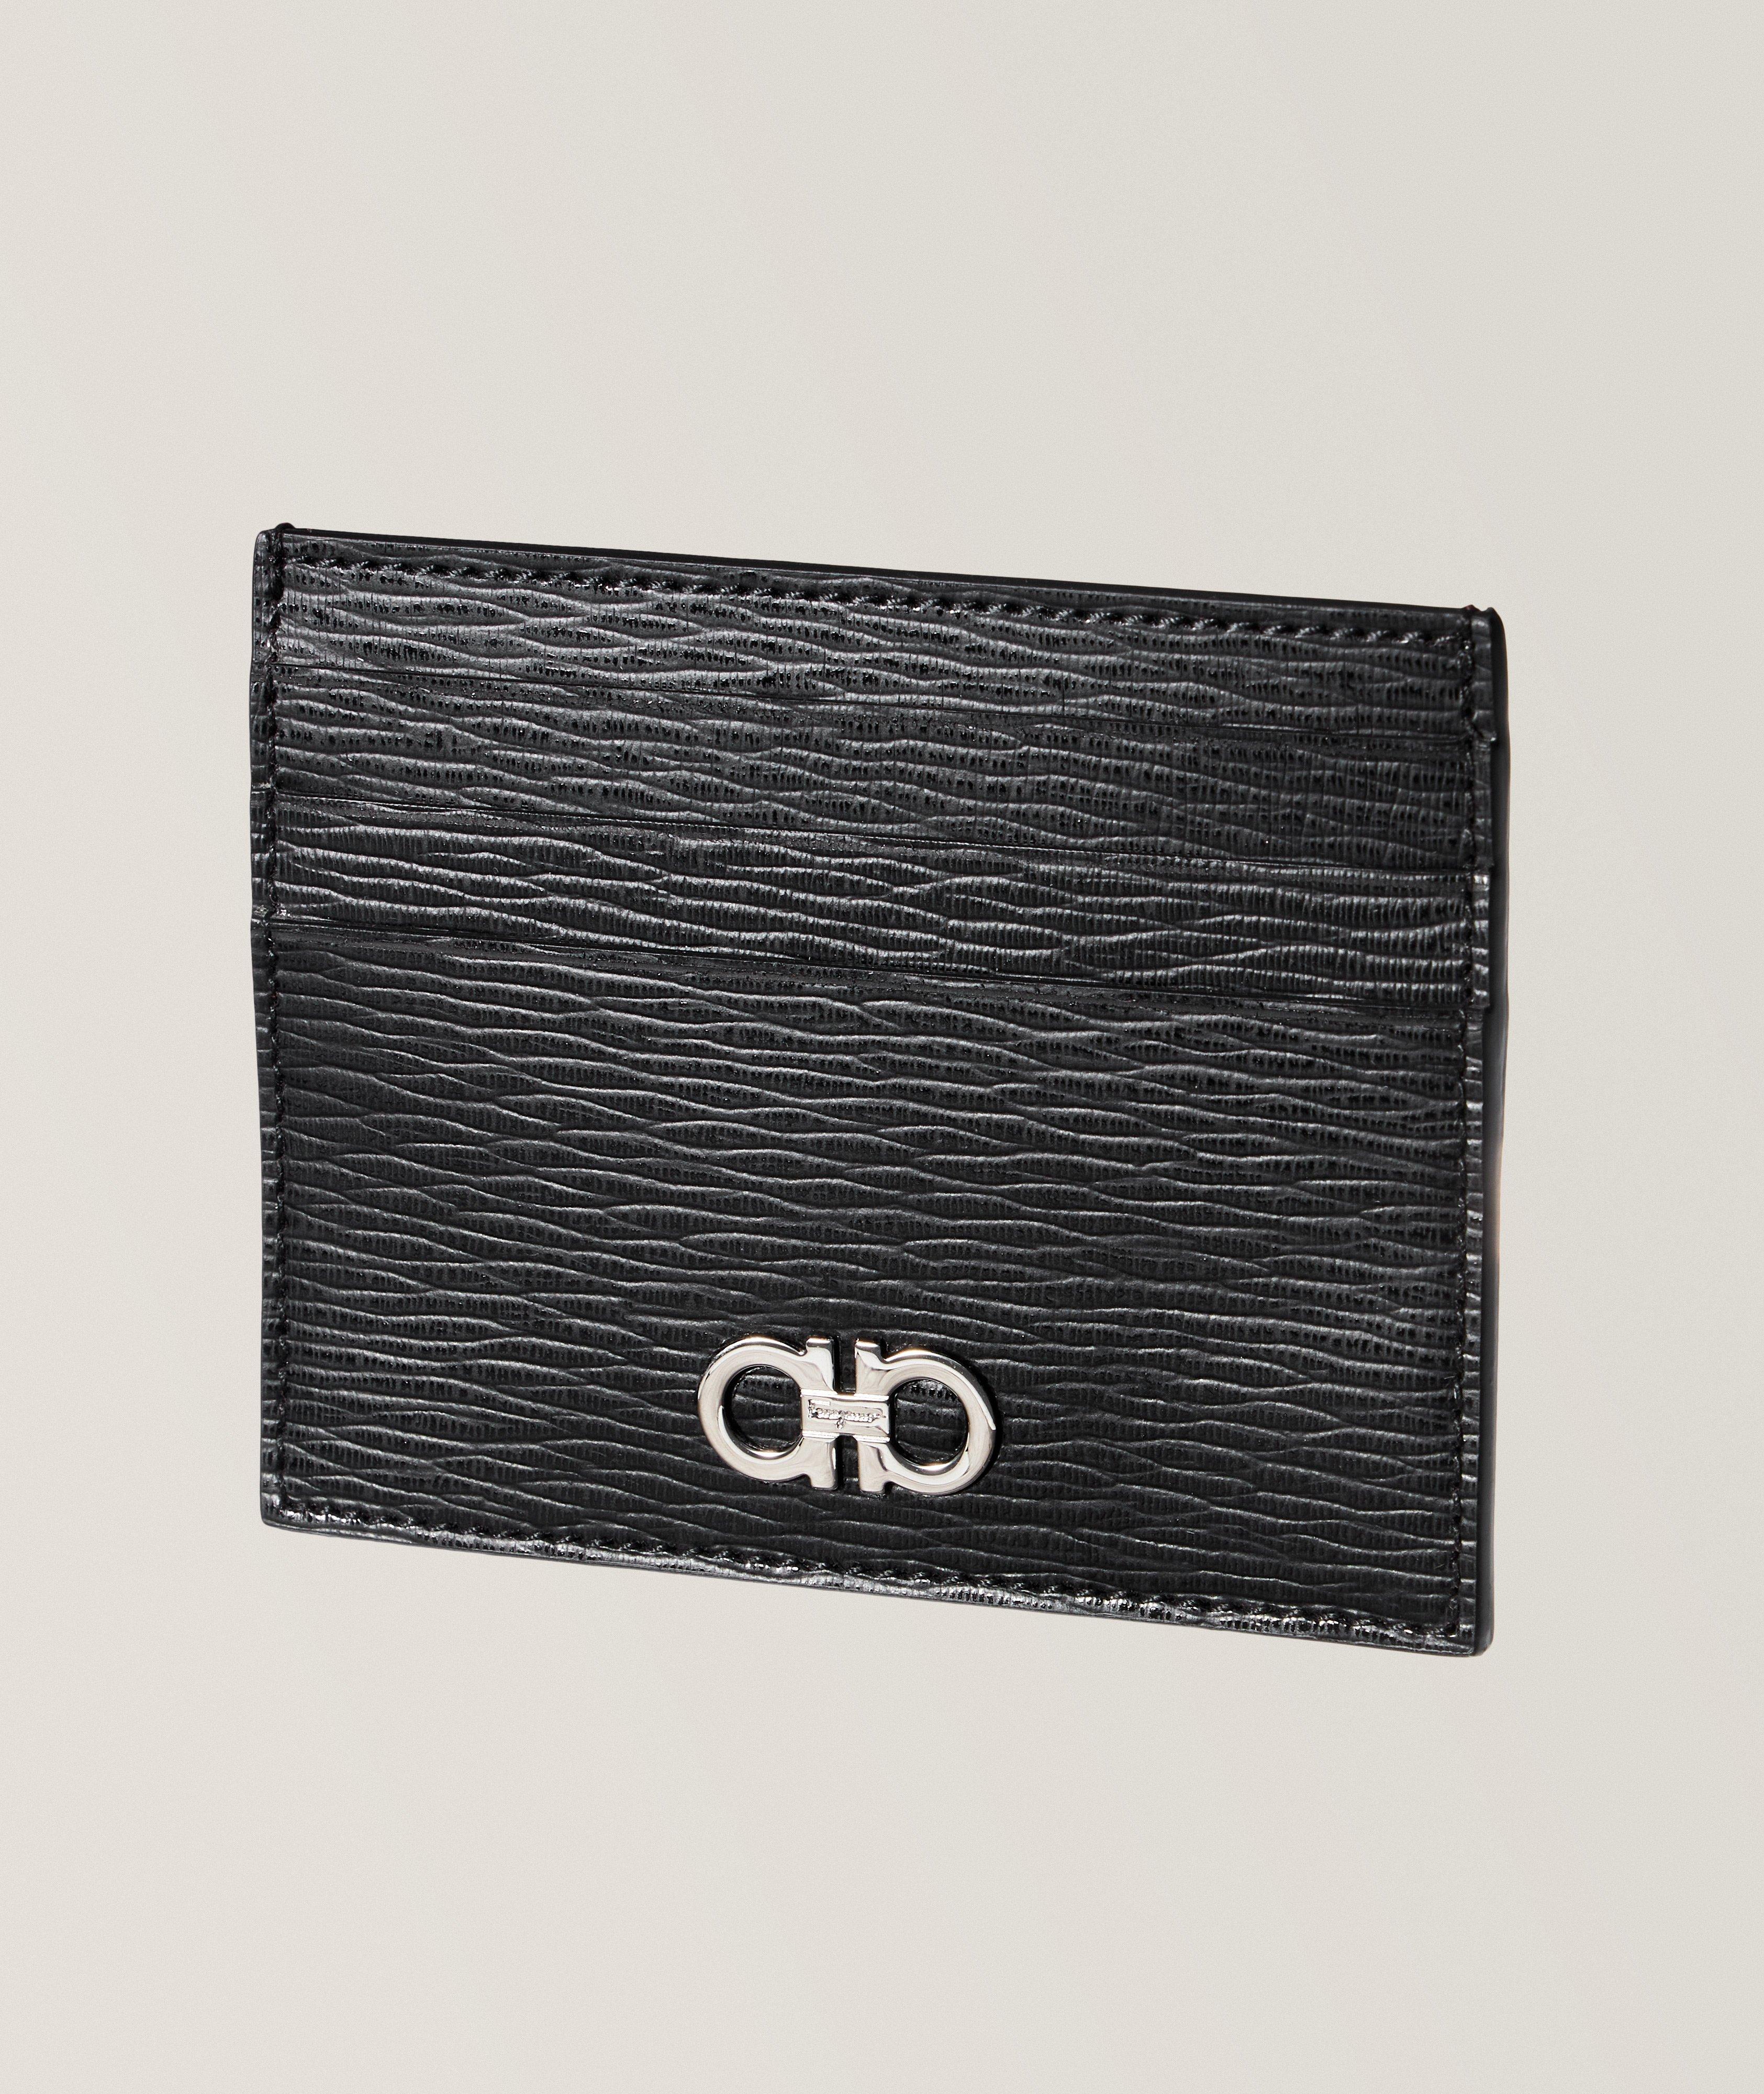 Revival Two-Tone Leather Cardholder image 0